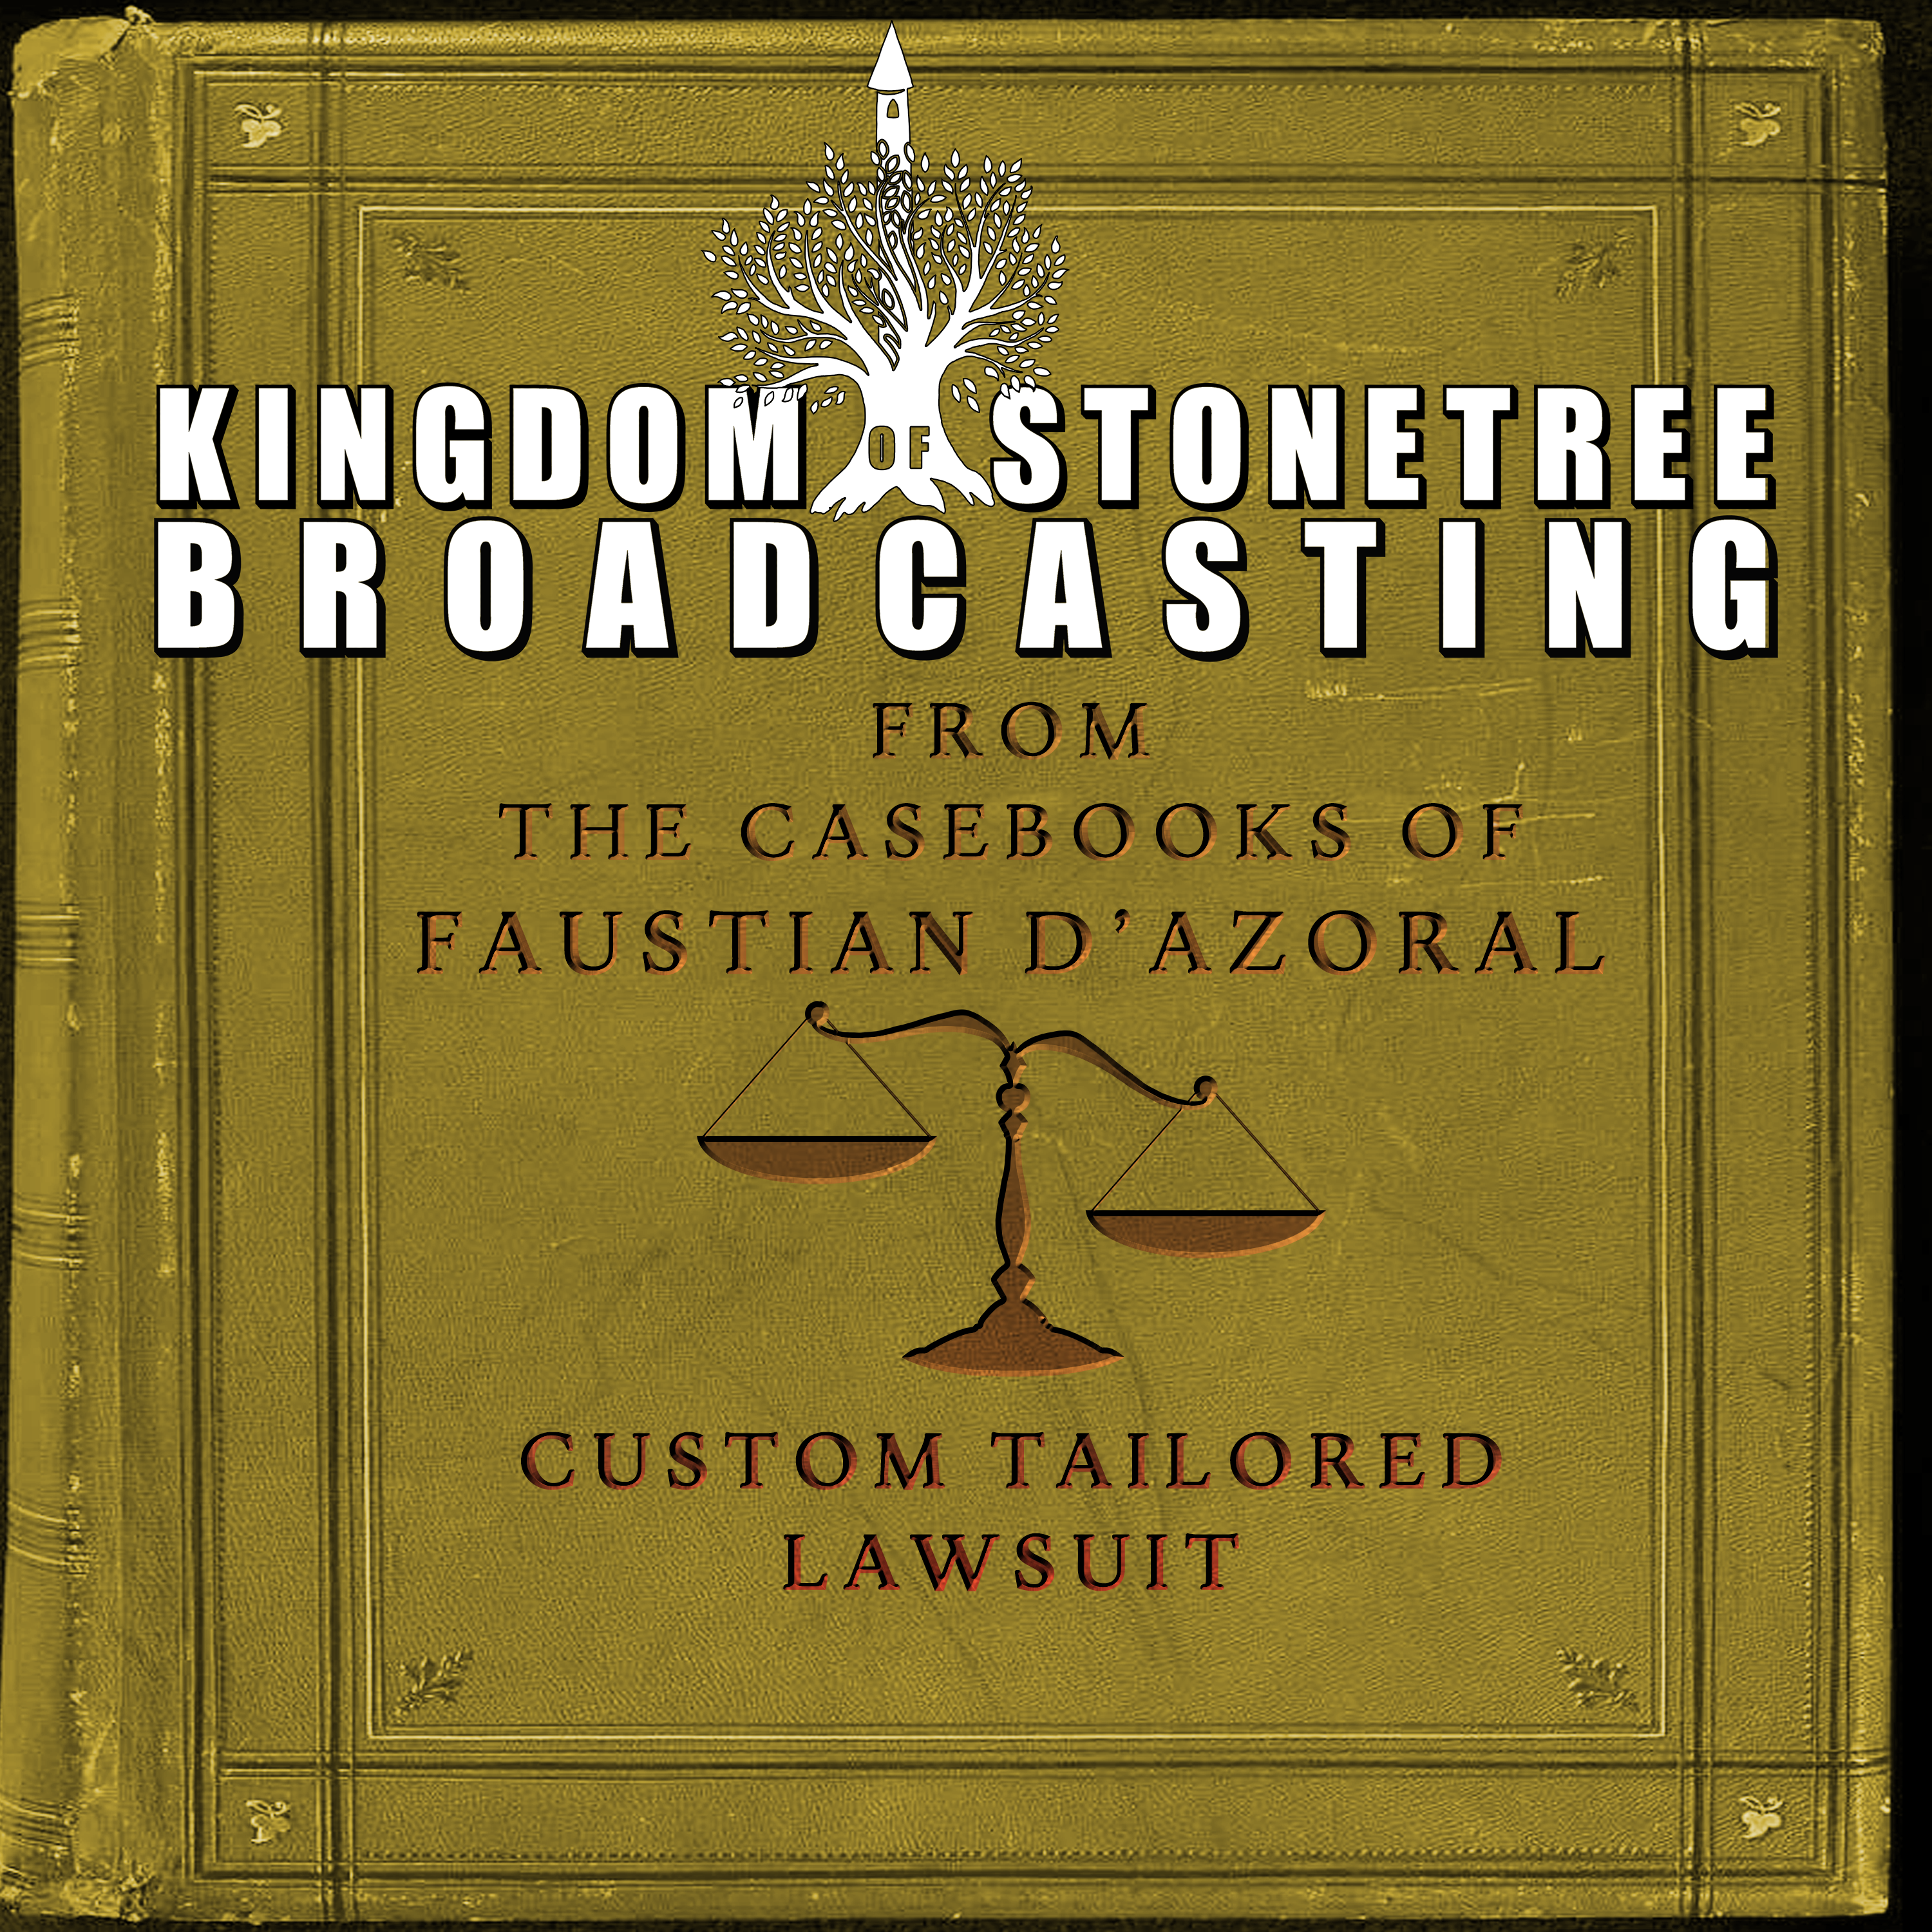 From The Casebooks Of Faustian D'Azoral- Custom Tailored Lawsuit